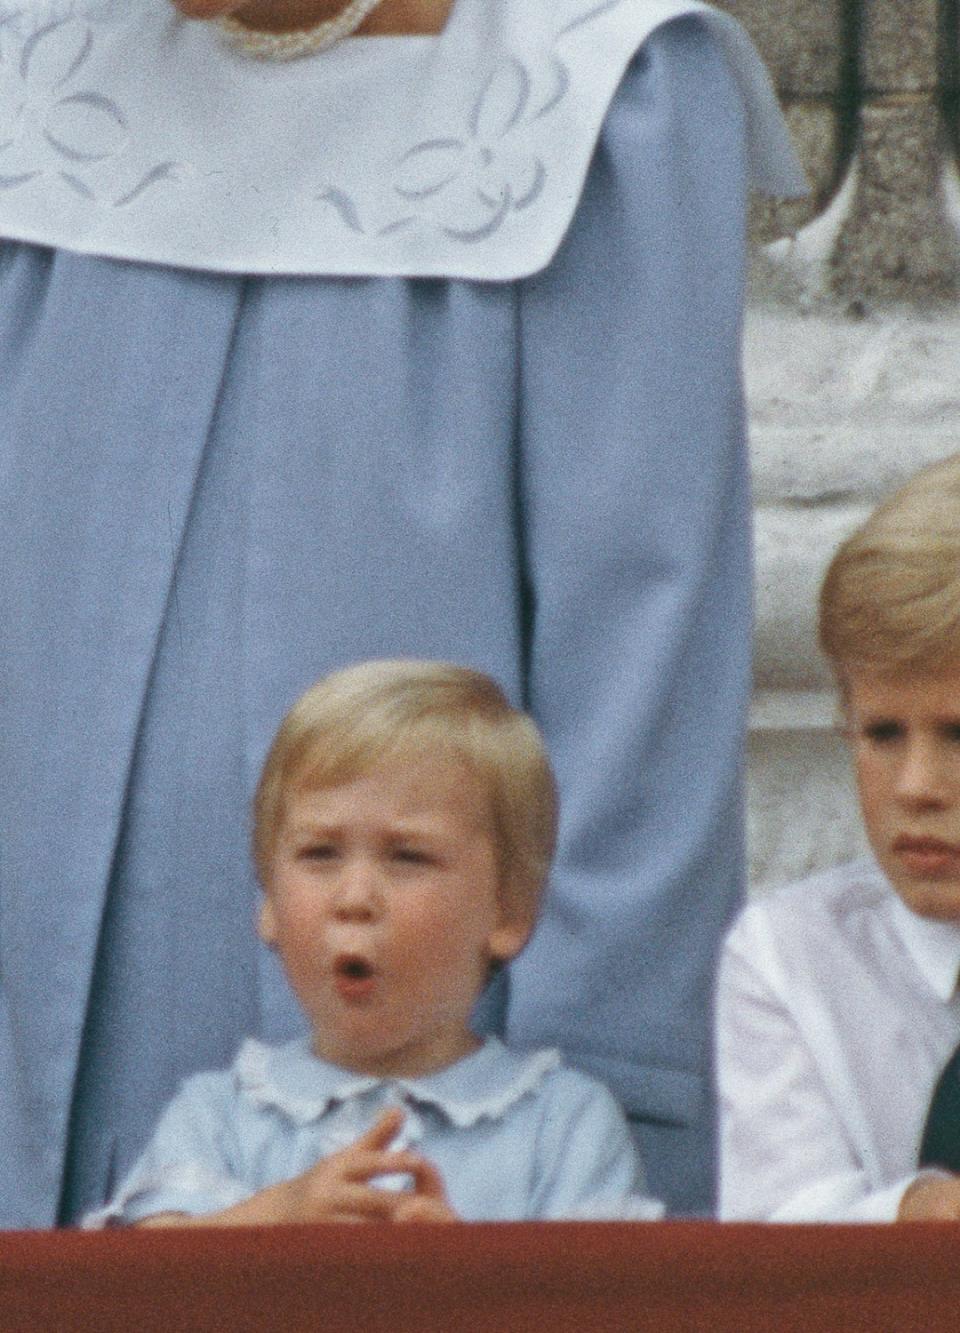 William's amazed reactions - just like Louis decades later